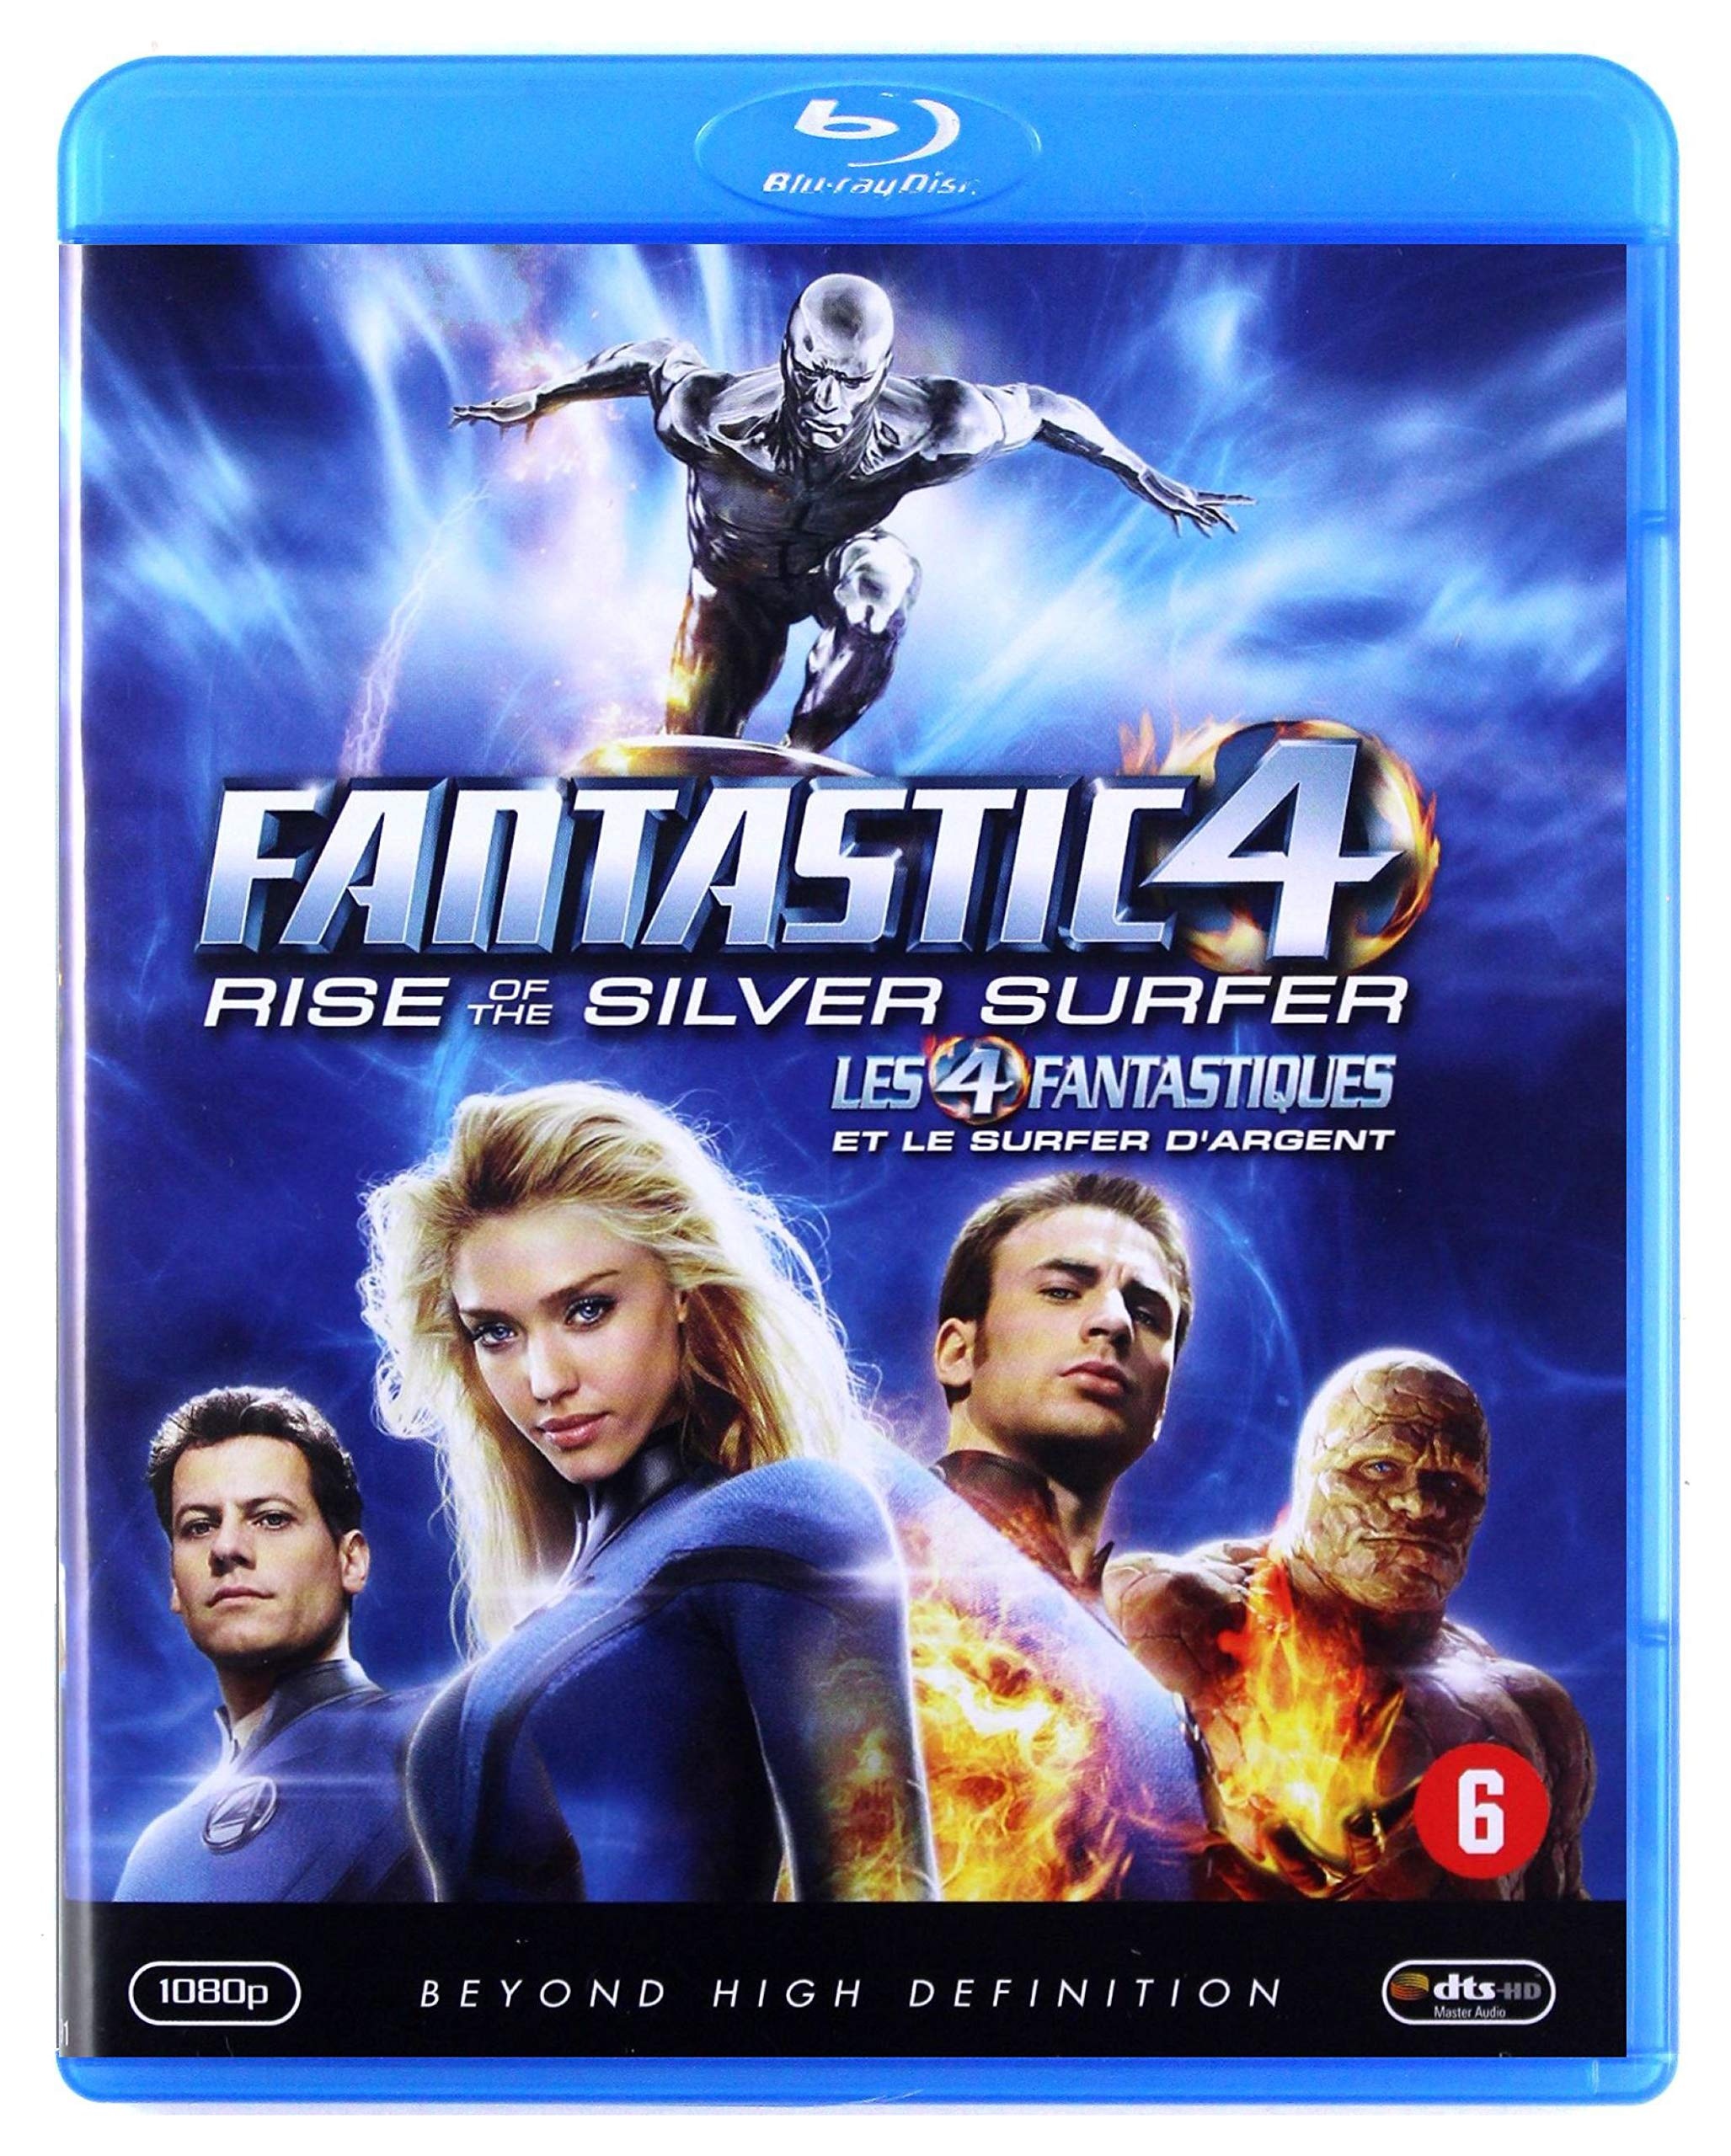 Unbekannt Blu Ray Fantastic 4: Rise of The Silver